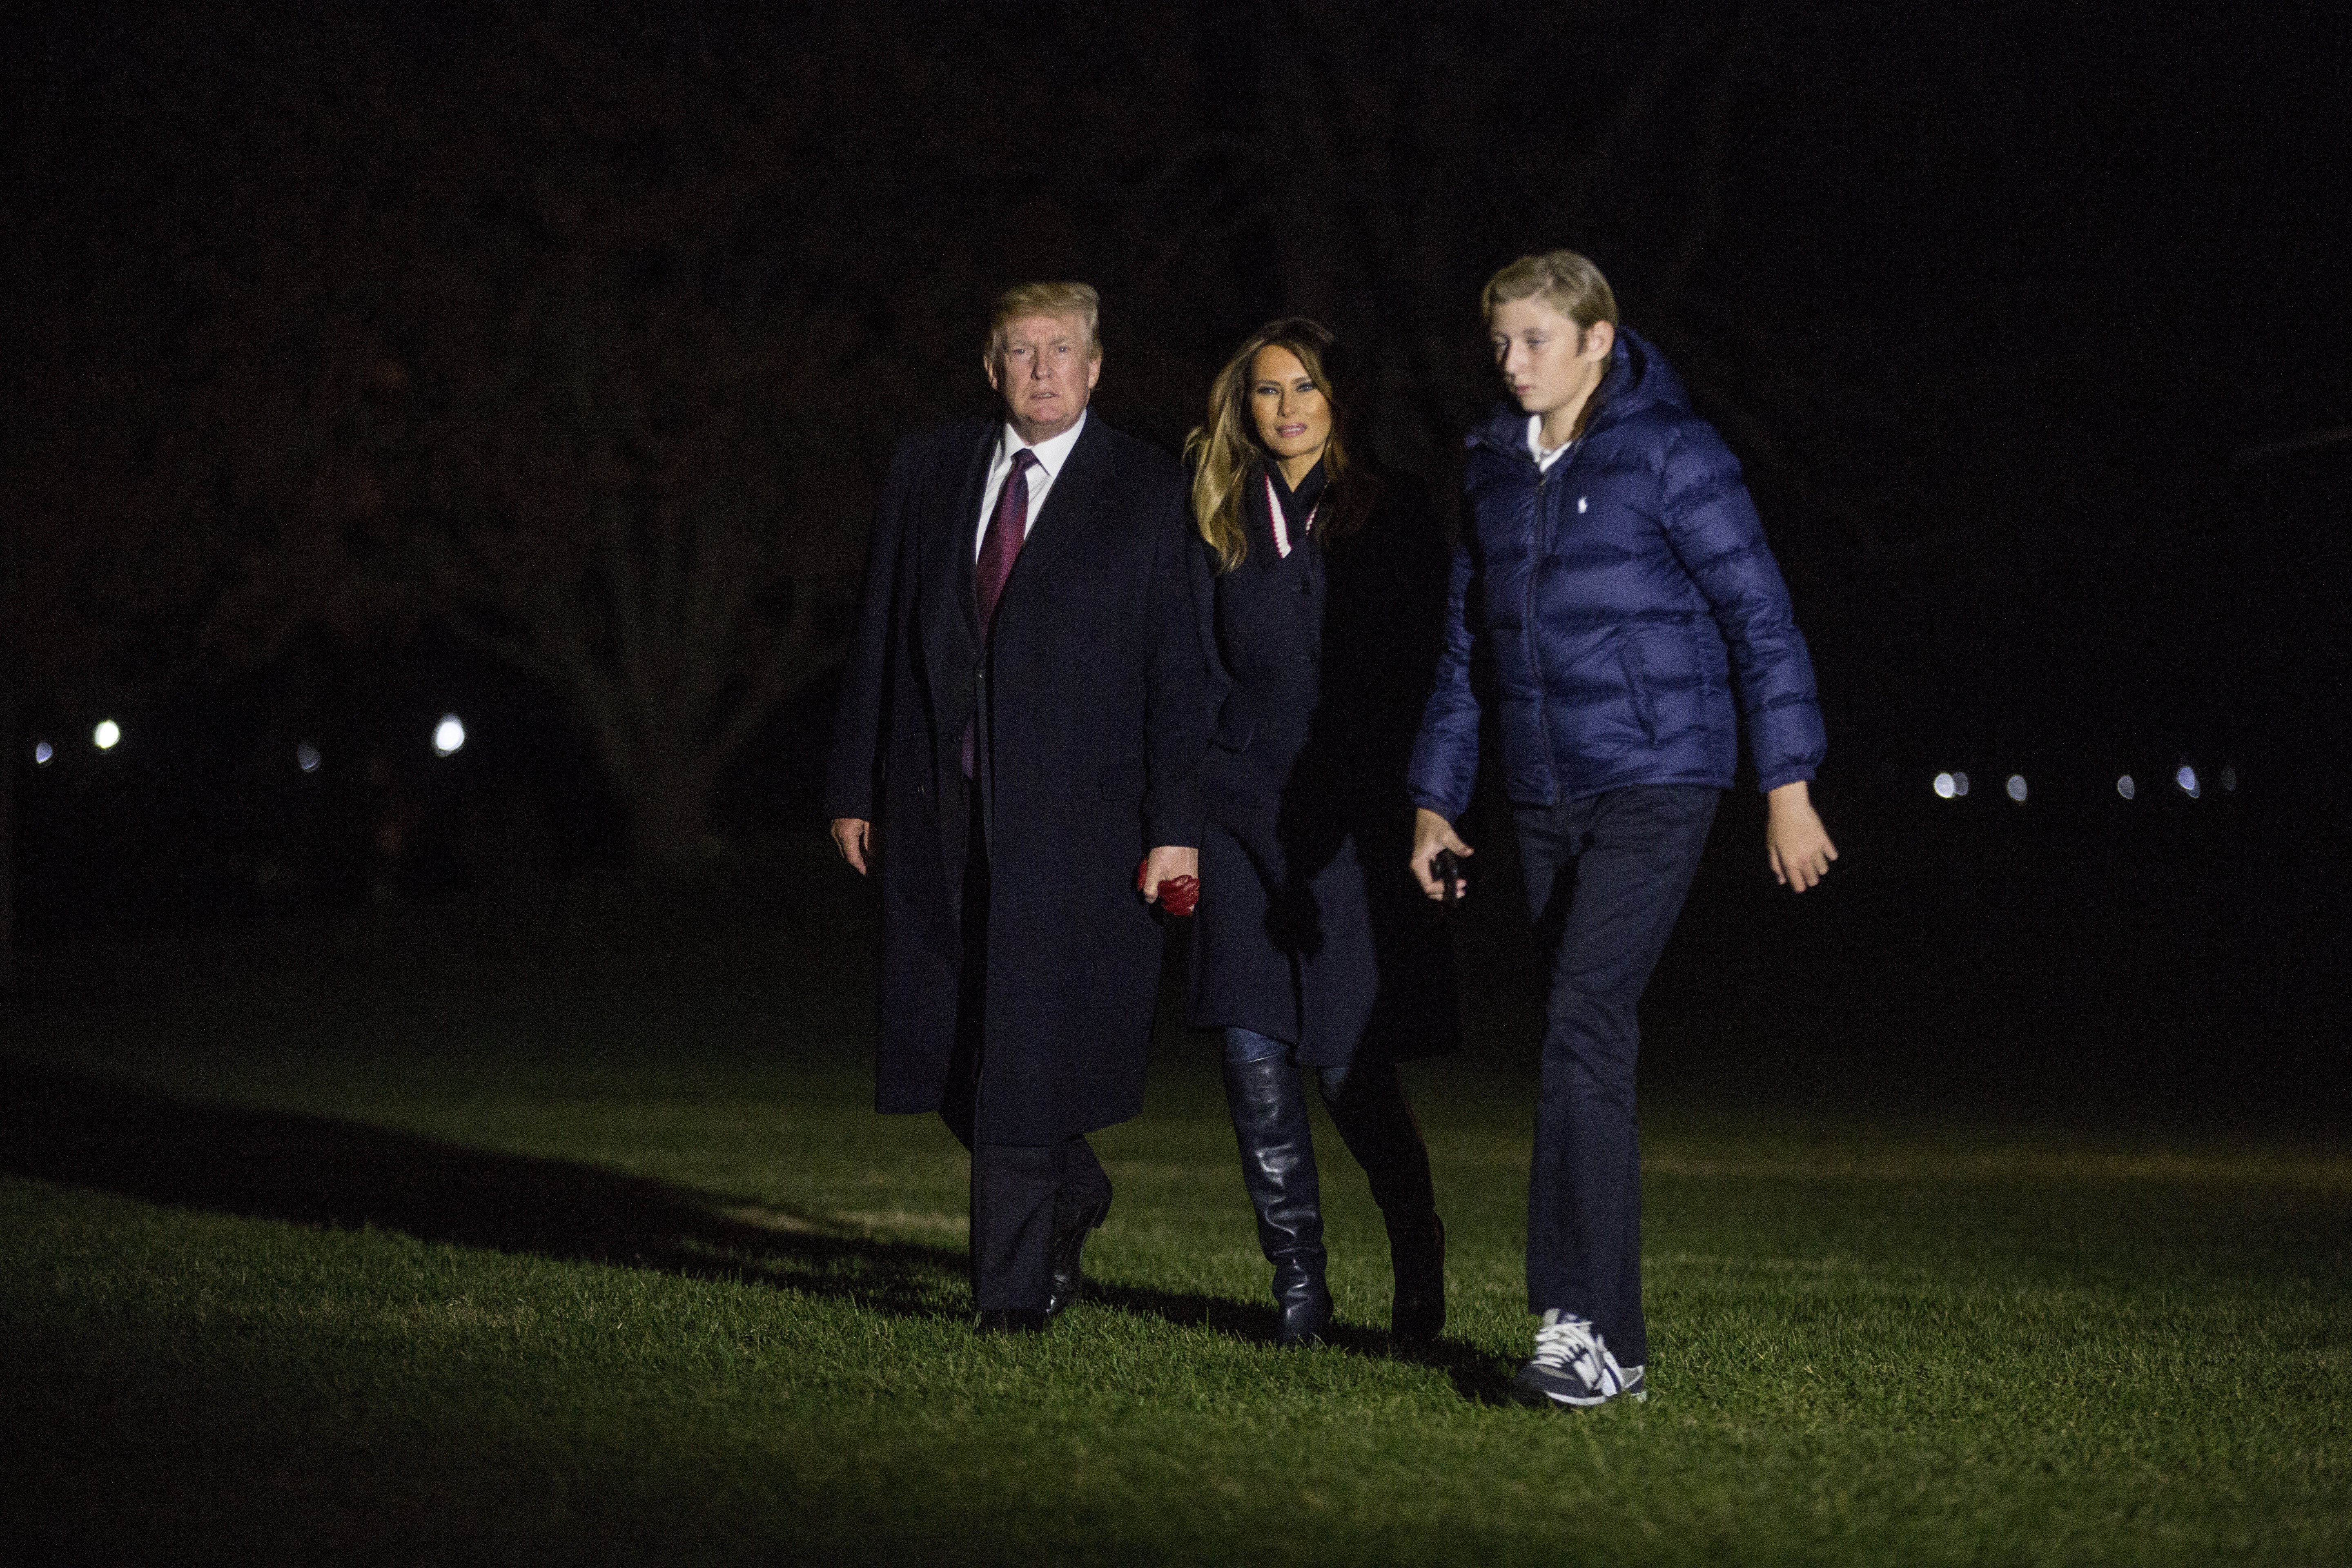 President Donald Trump, first lady Melania Trump and son Barron Trump cross the South Lawn of the White House November 25, 2018 | Photo: Getty Images